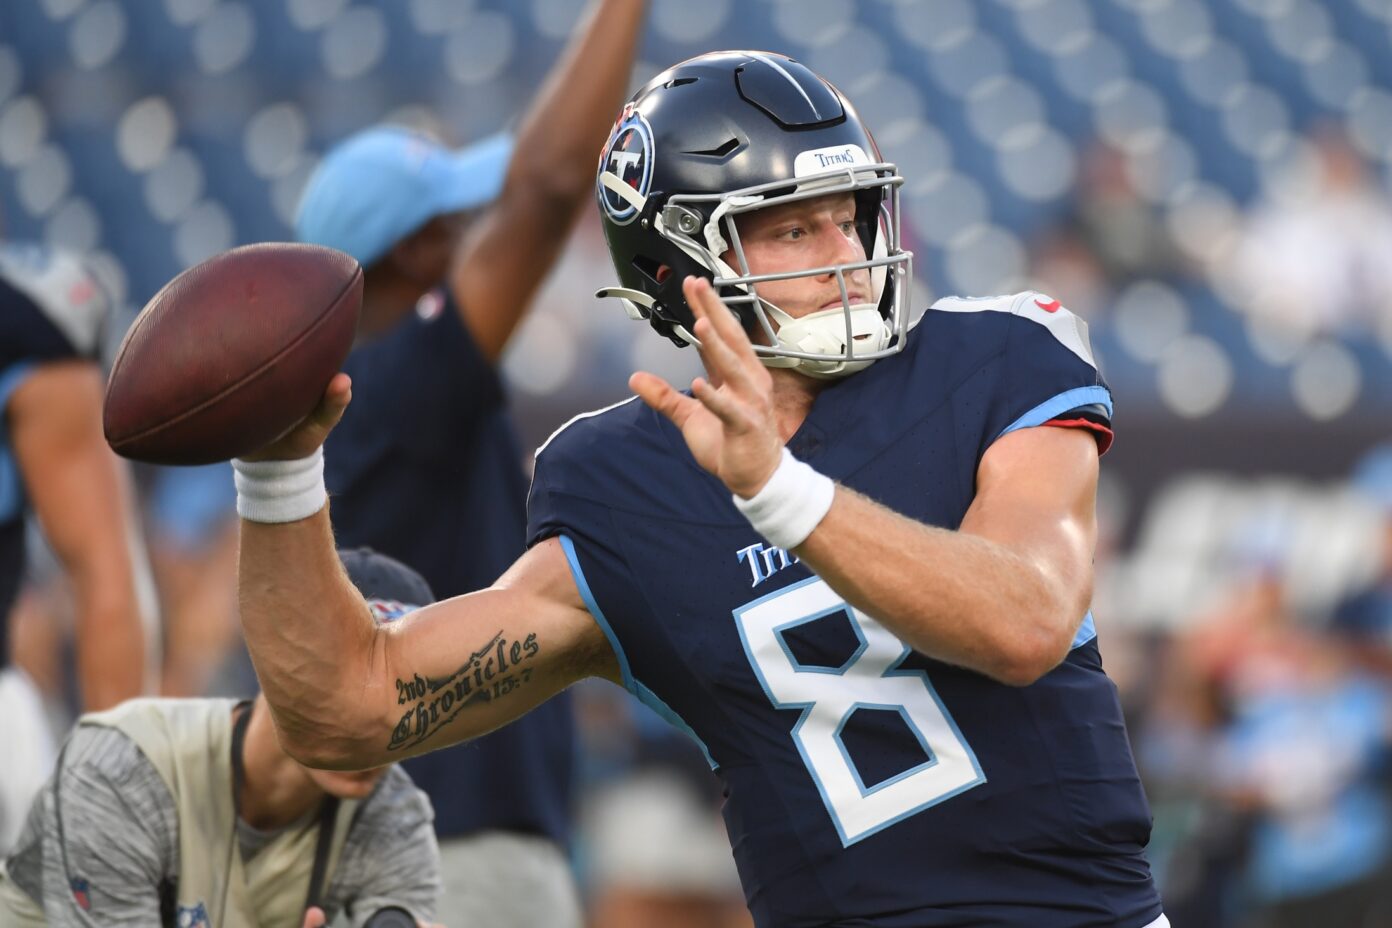 Where Will Levis Sits on the Titans' QB Depth Chart After Quad Injury